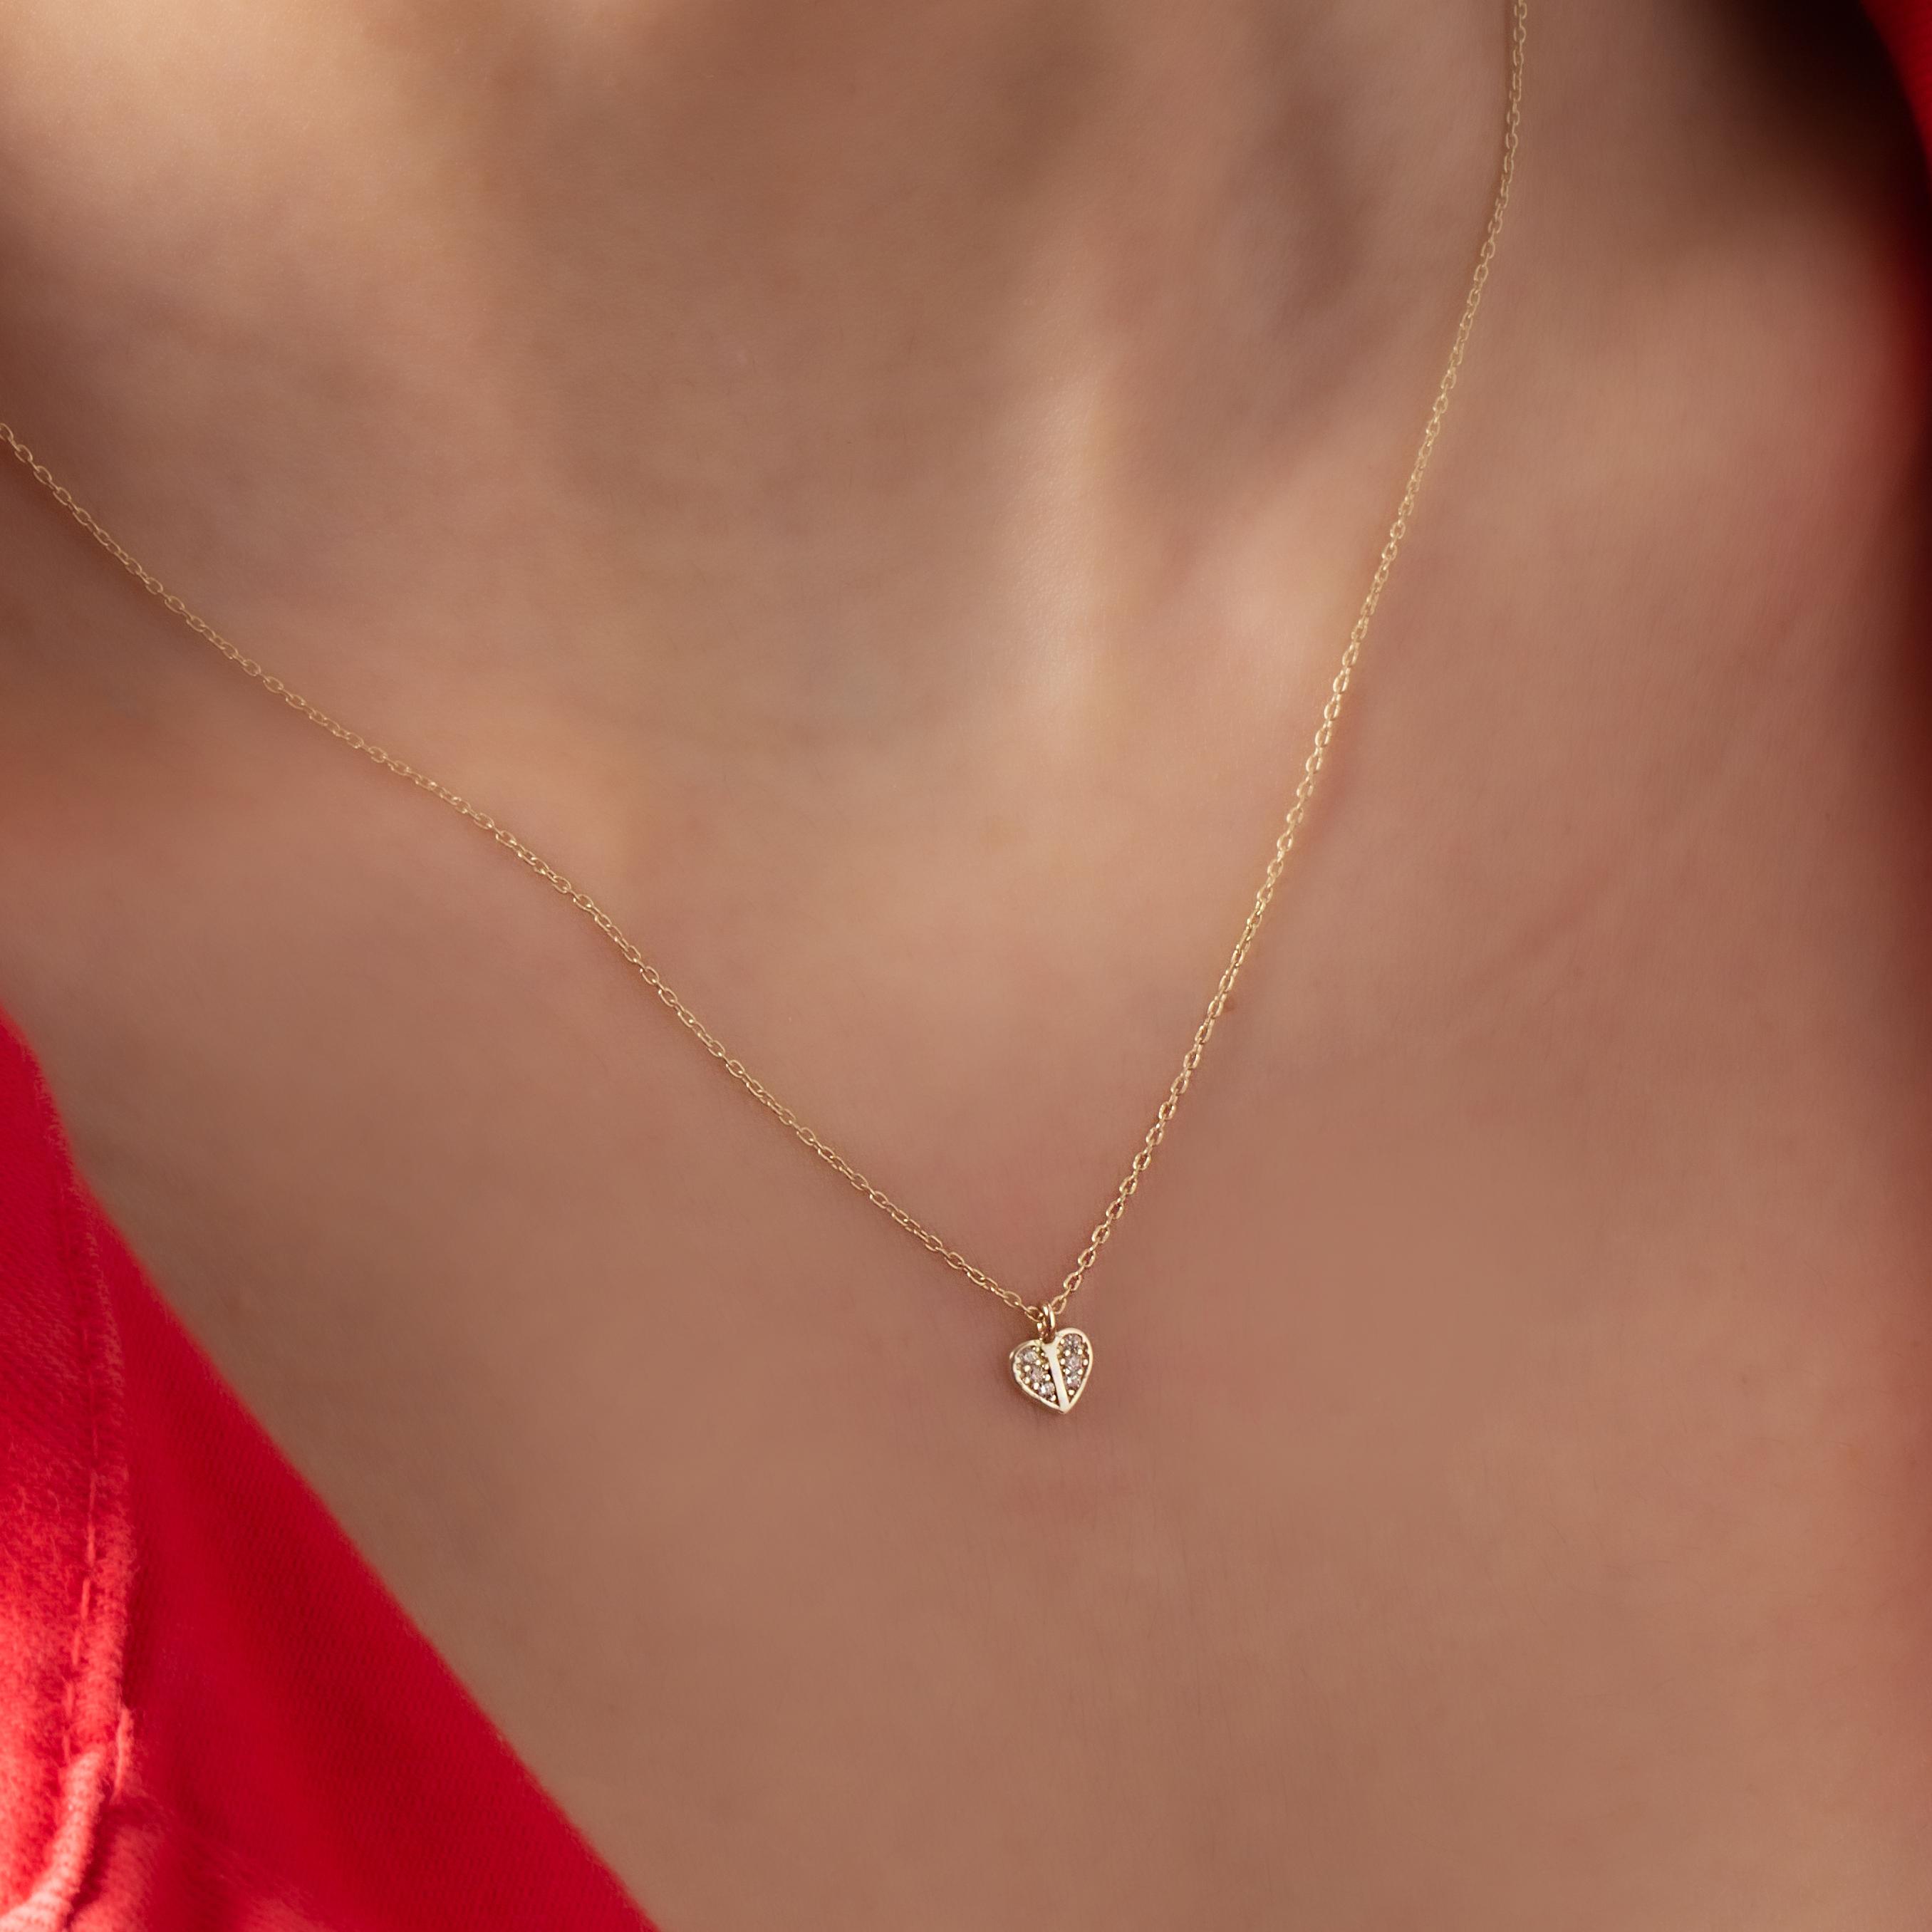 Minimal Heart Necklace with 14 Carat Gold Stone